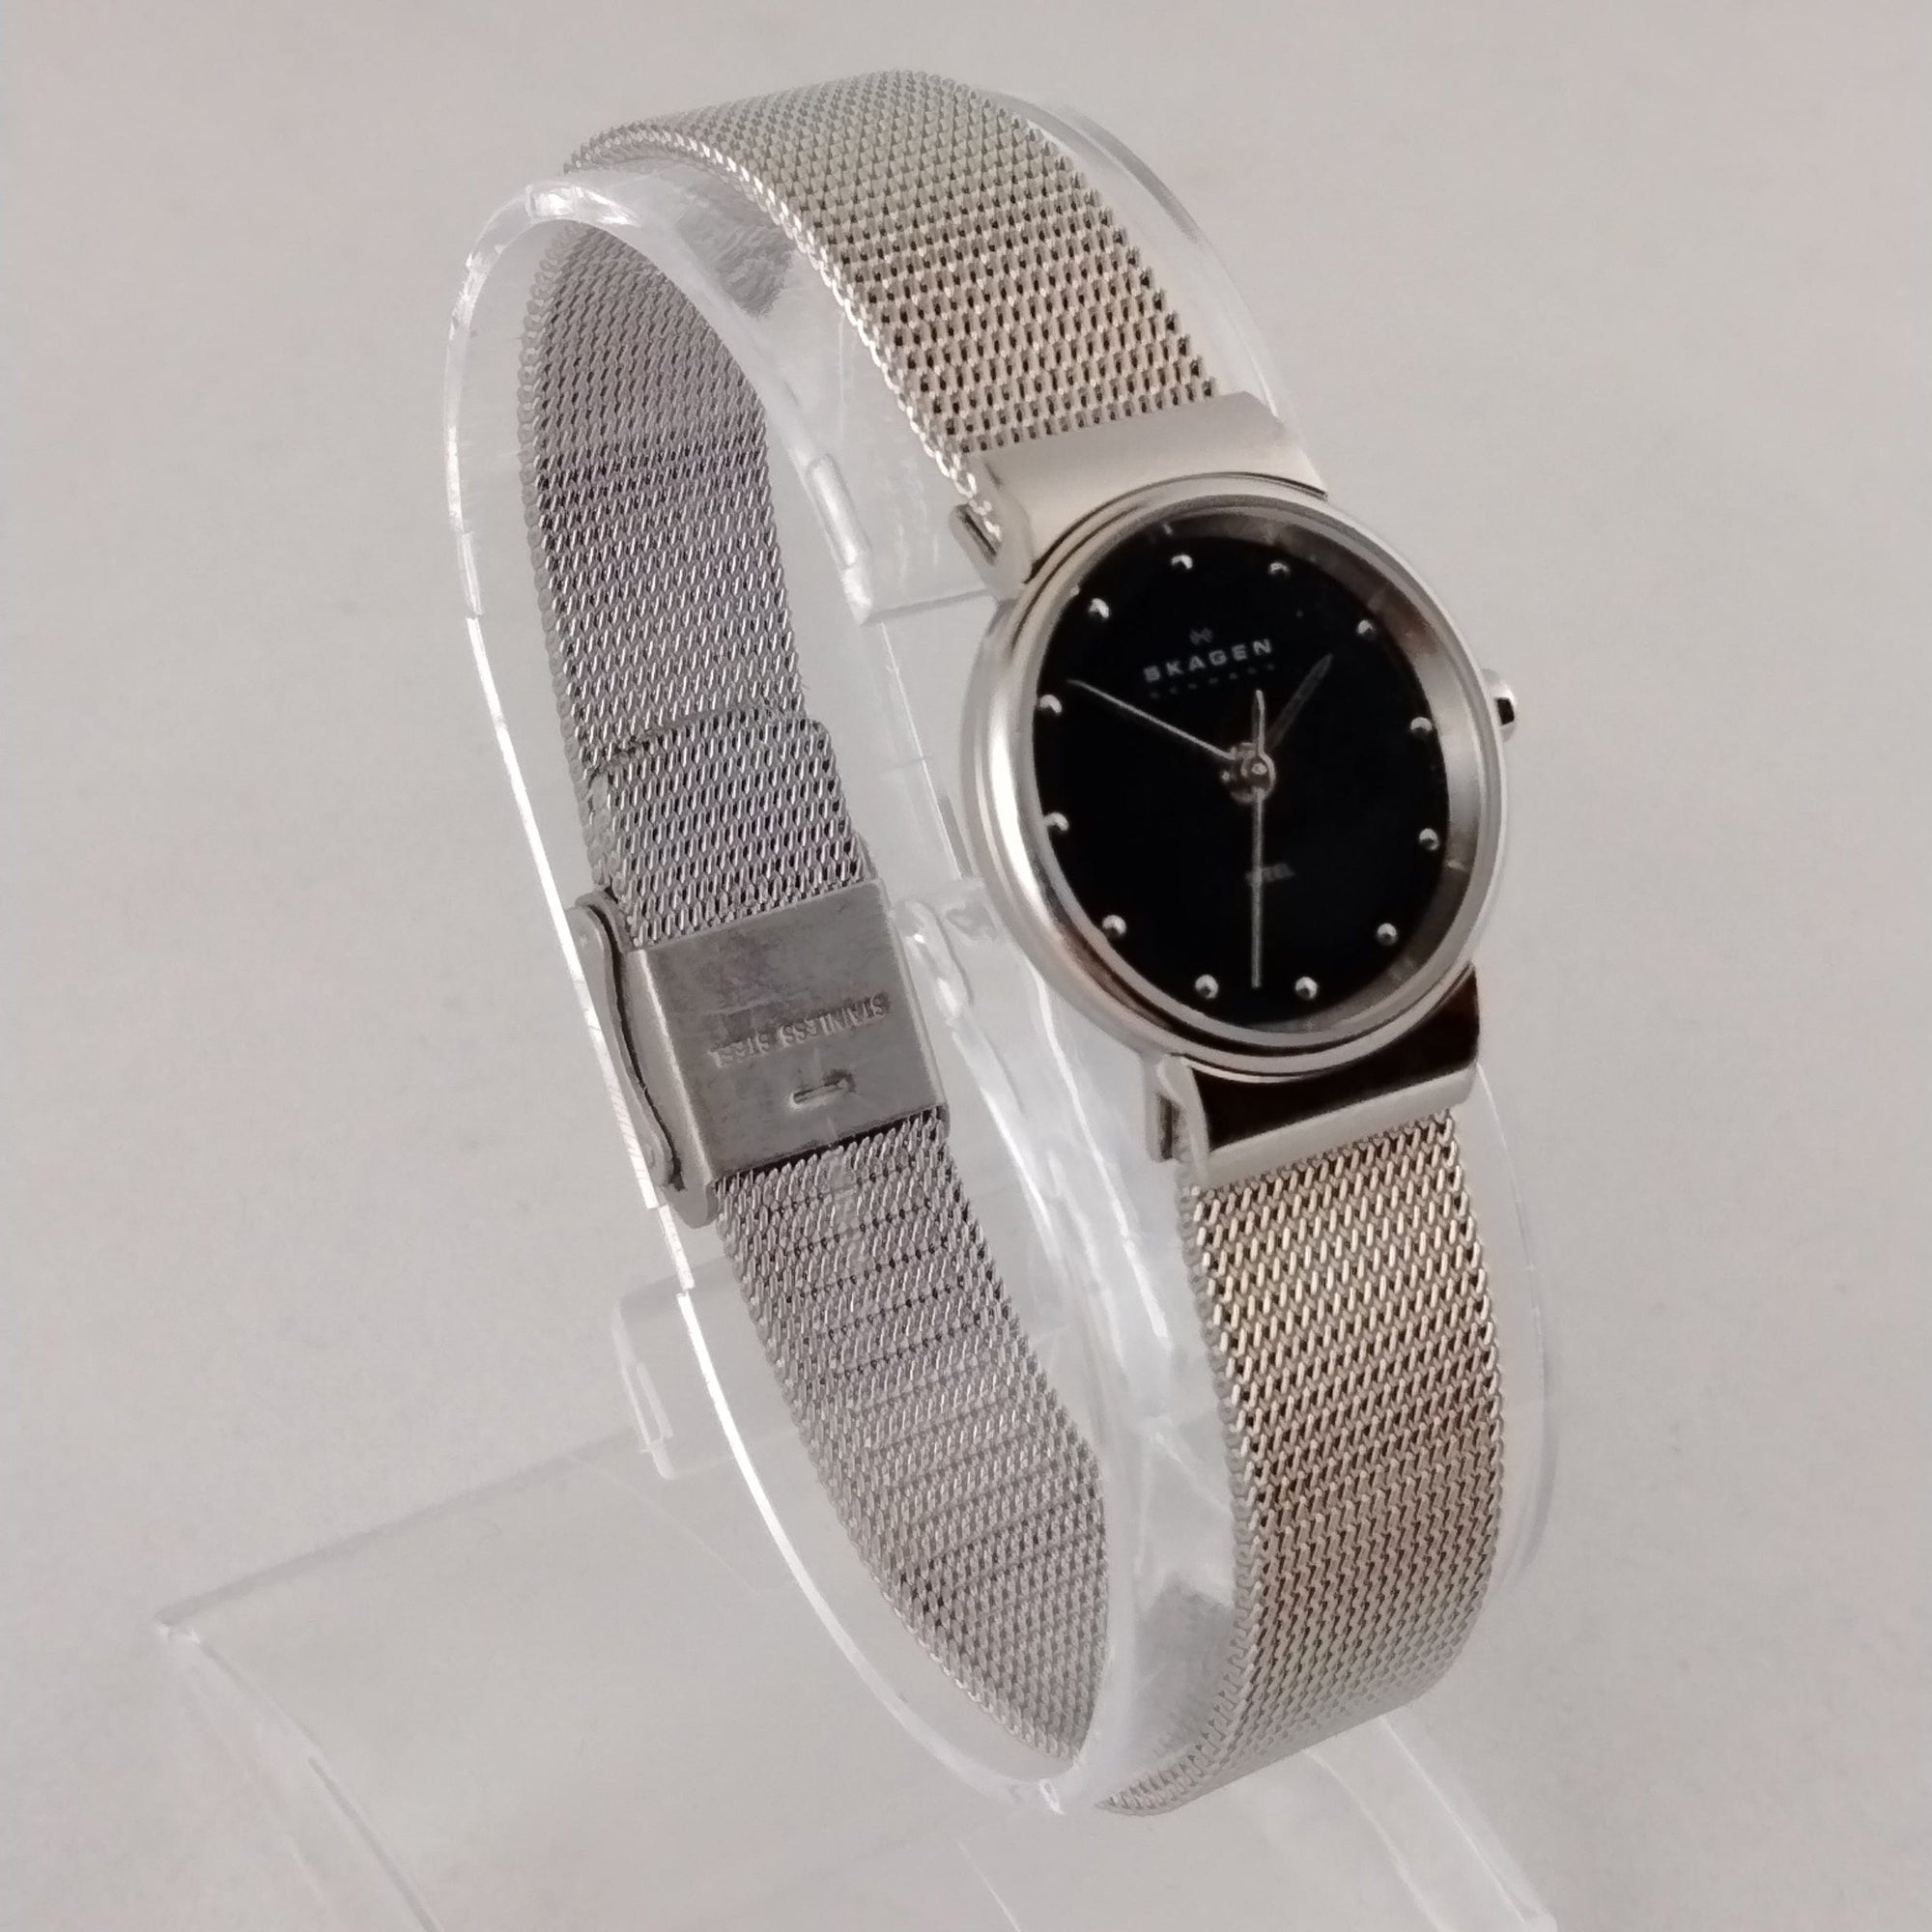 I Like Mikes Mid Century Modern Watches Skagen Women's Stainless Steel Round Watch, Black Dial, Jewel Hour Markers, Mesh Strap